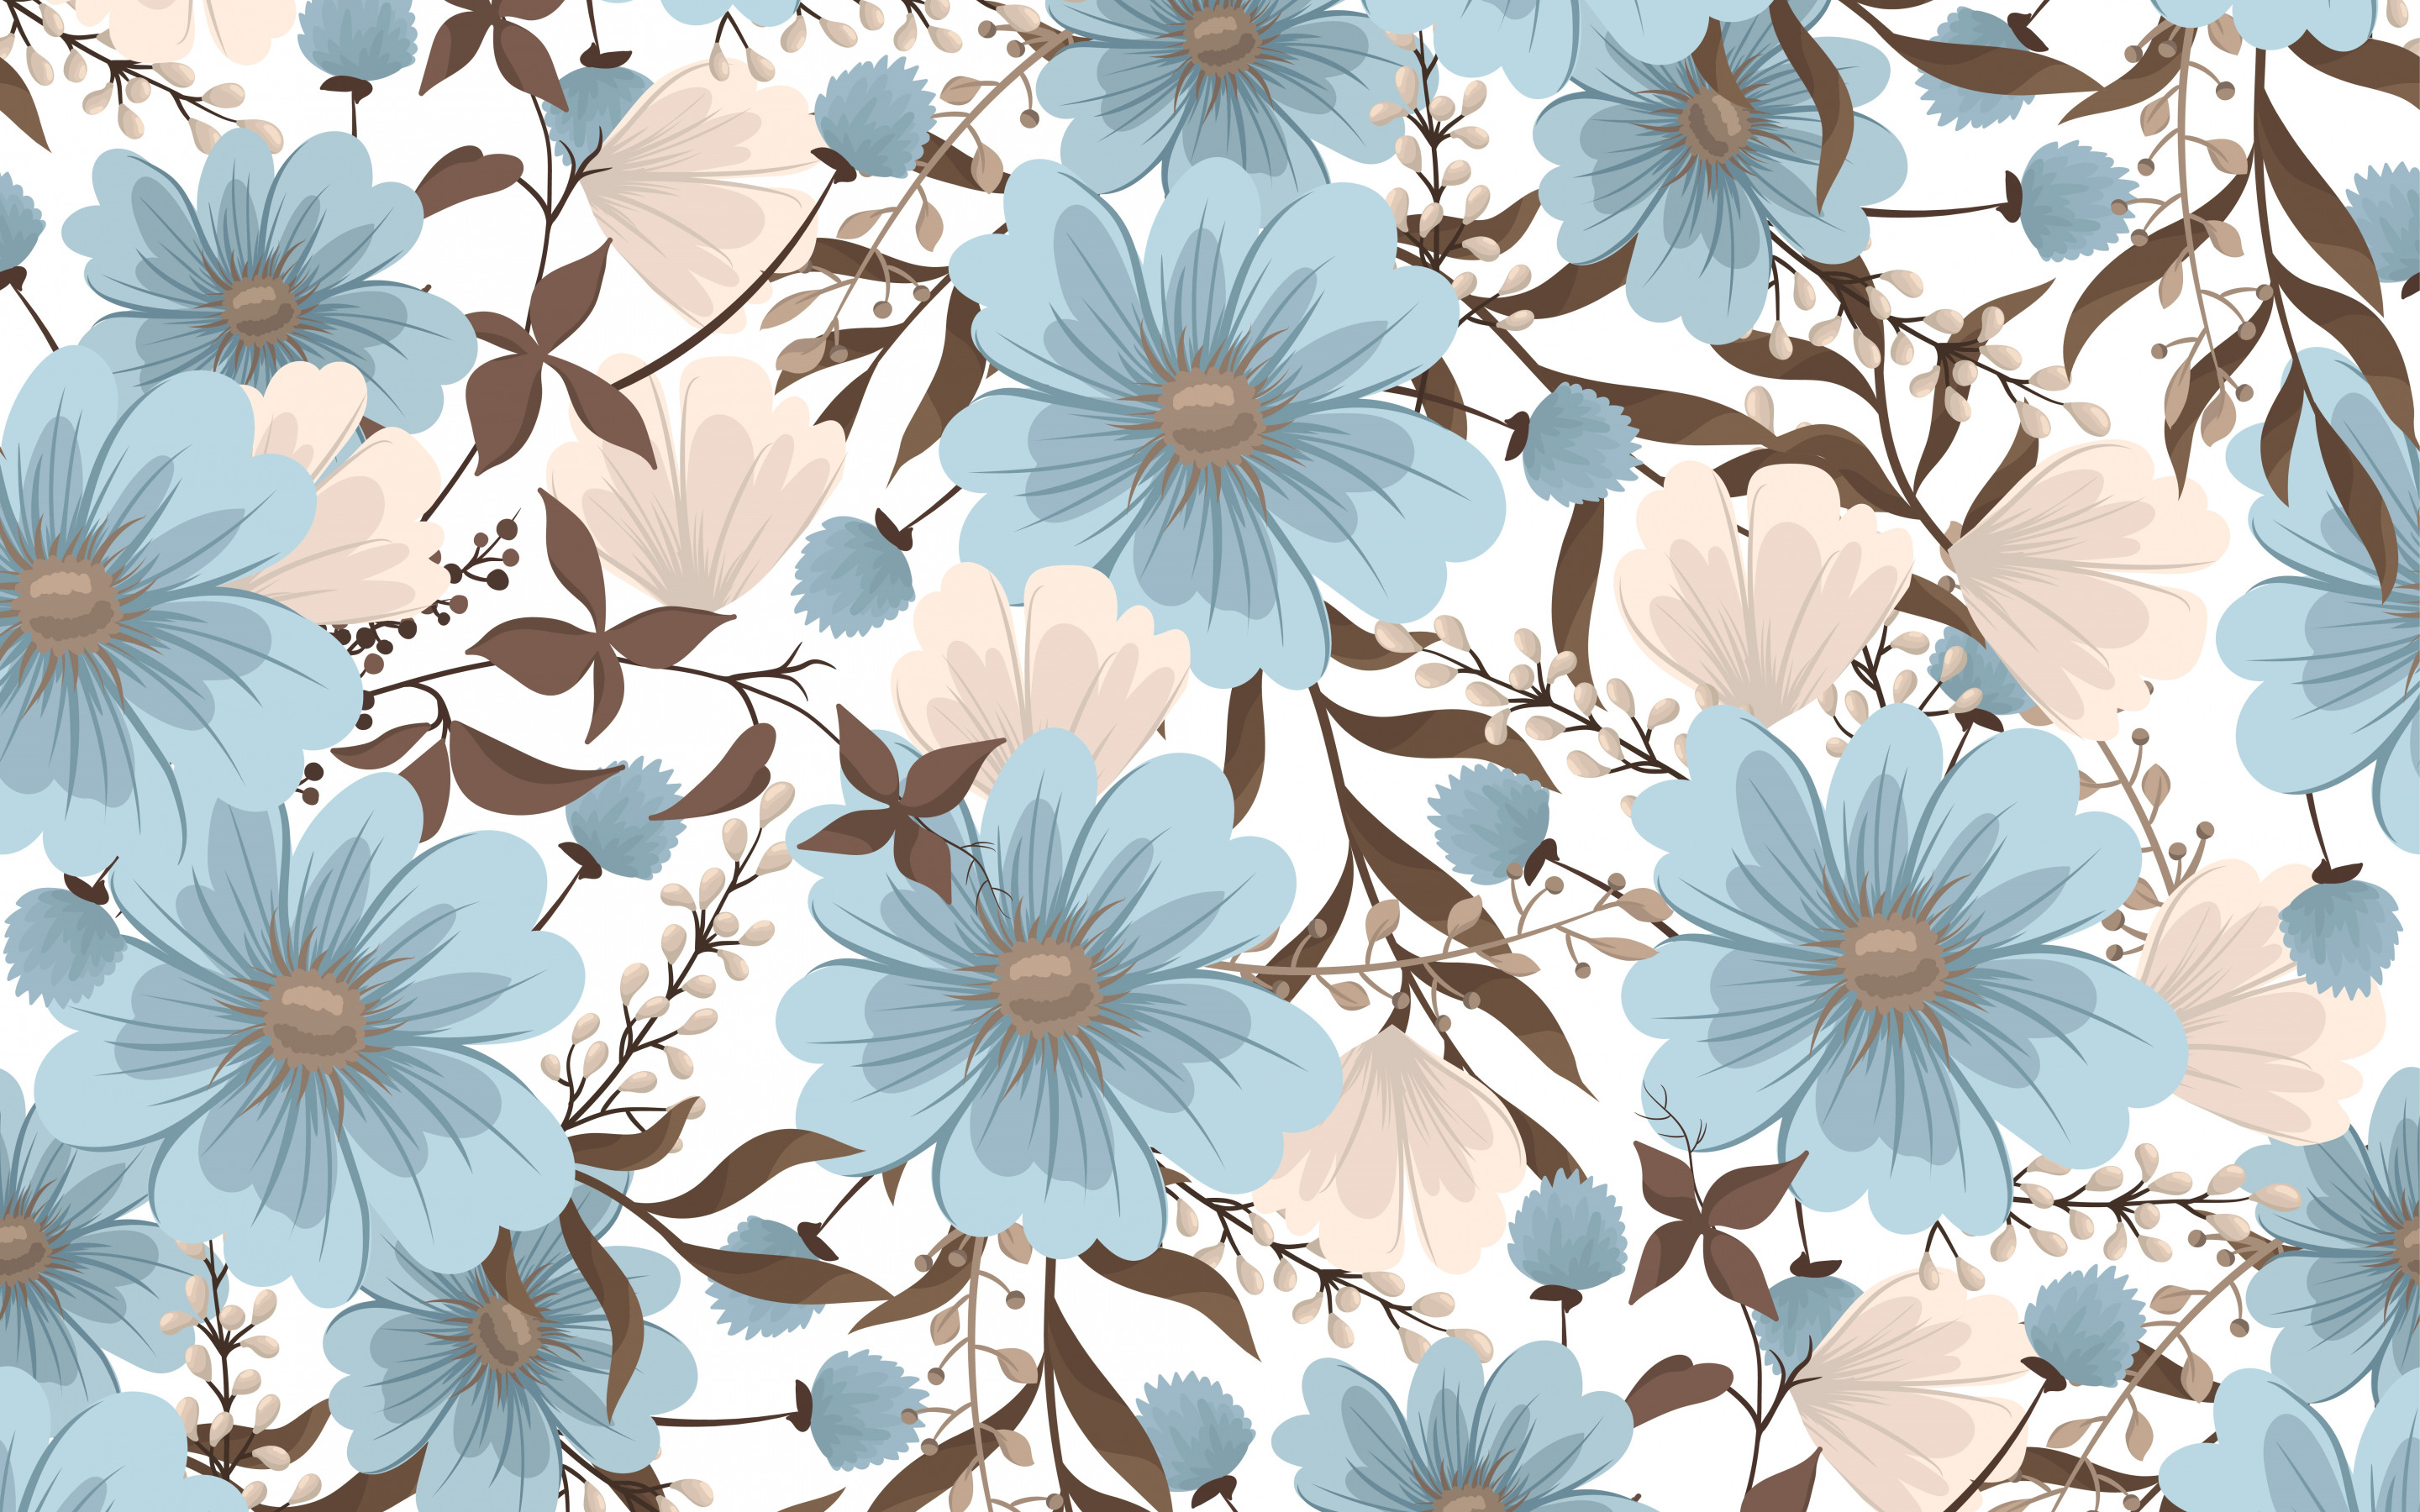 Download wallpaper retro flowers texture, blue brown flowers texture, retro floral background, texture with flowers, retro background for desktop with resolution 2880x1800. High Quality HD picture wallpaper